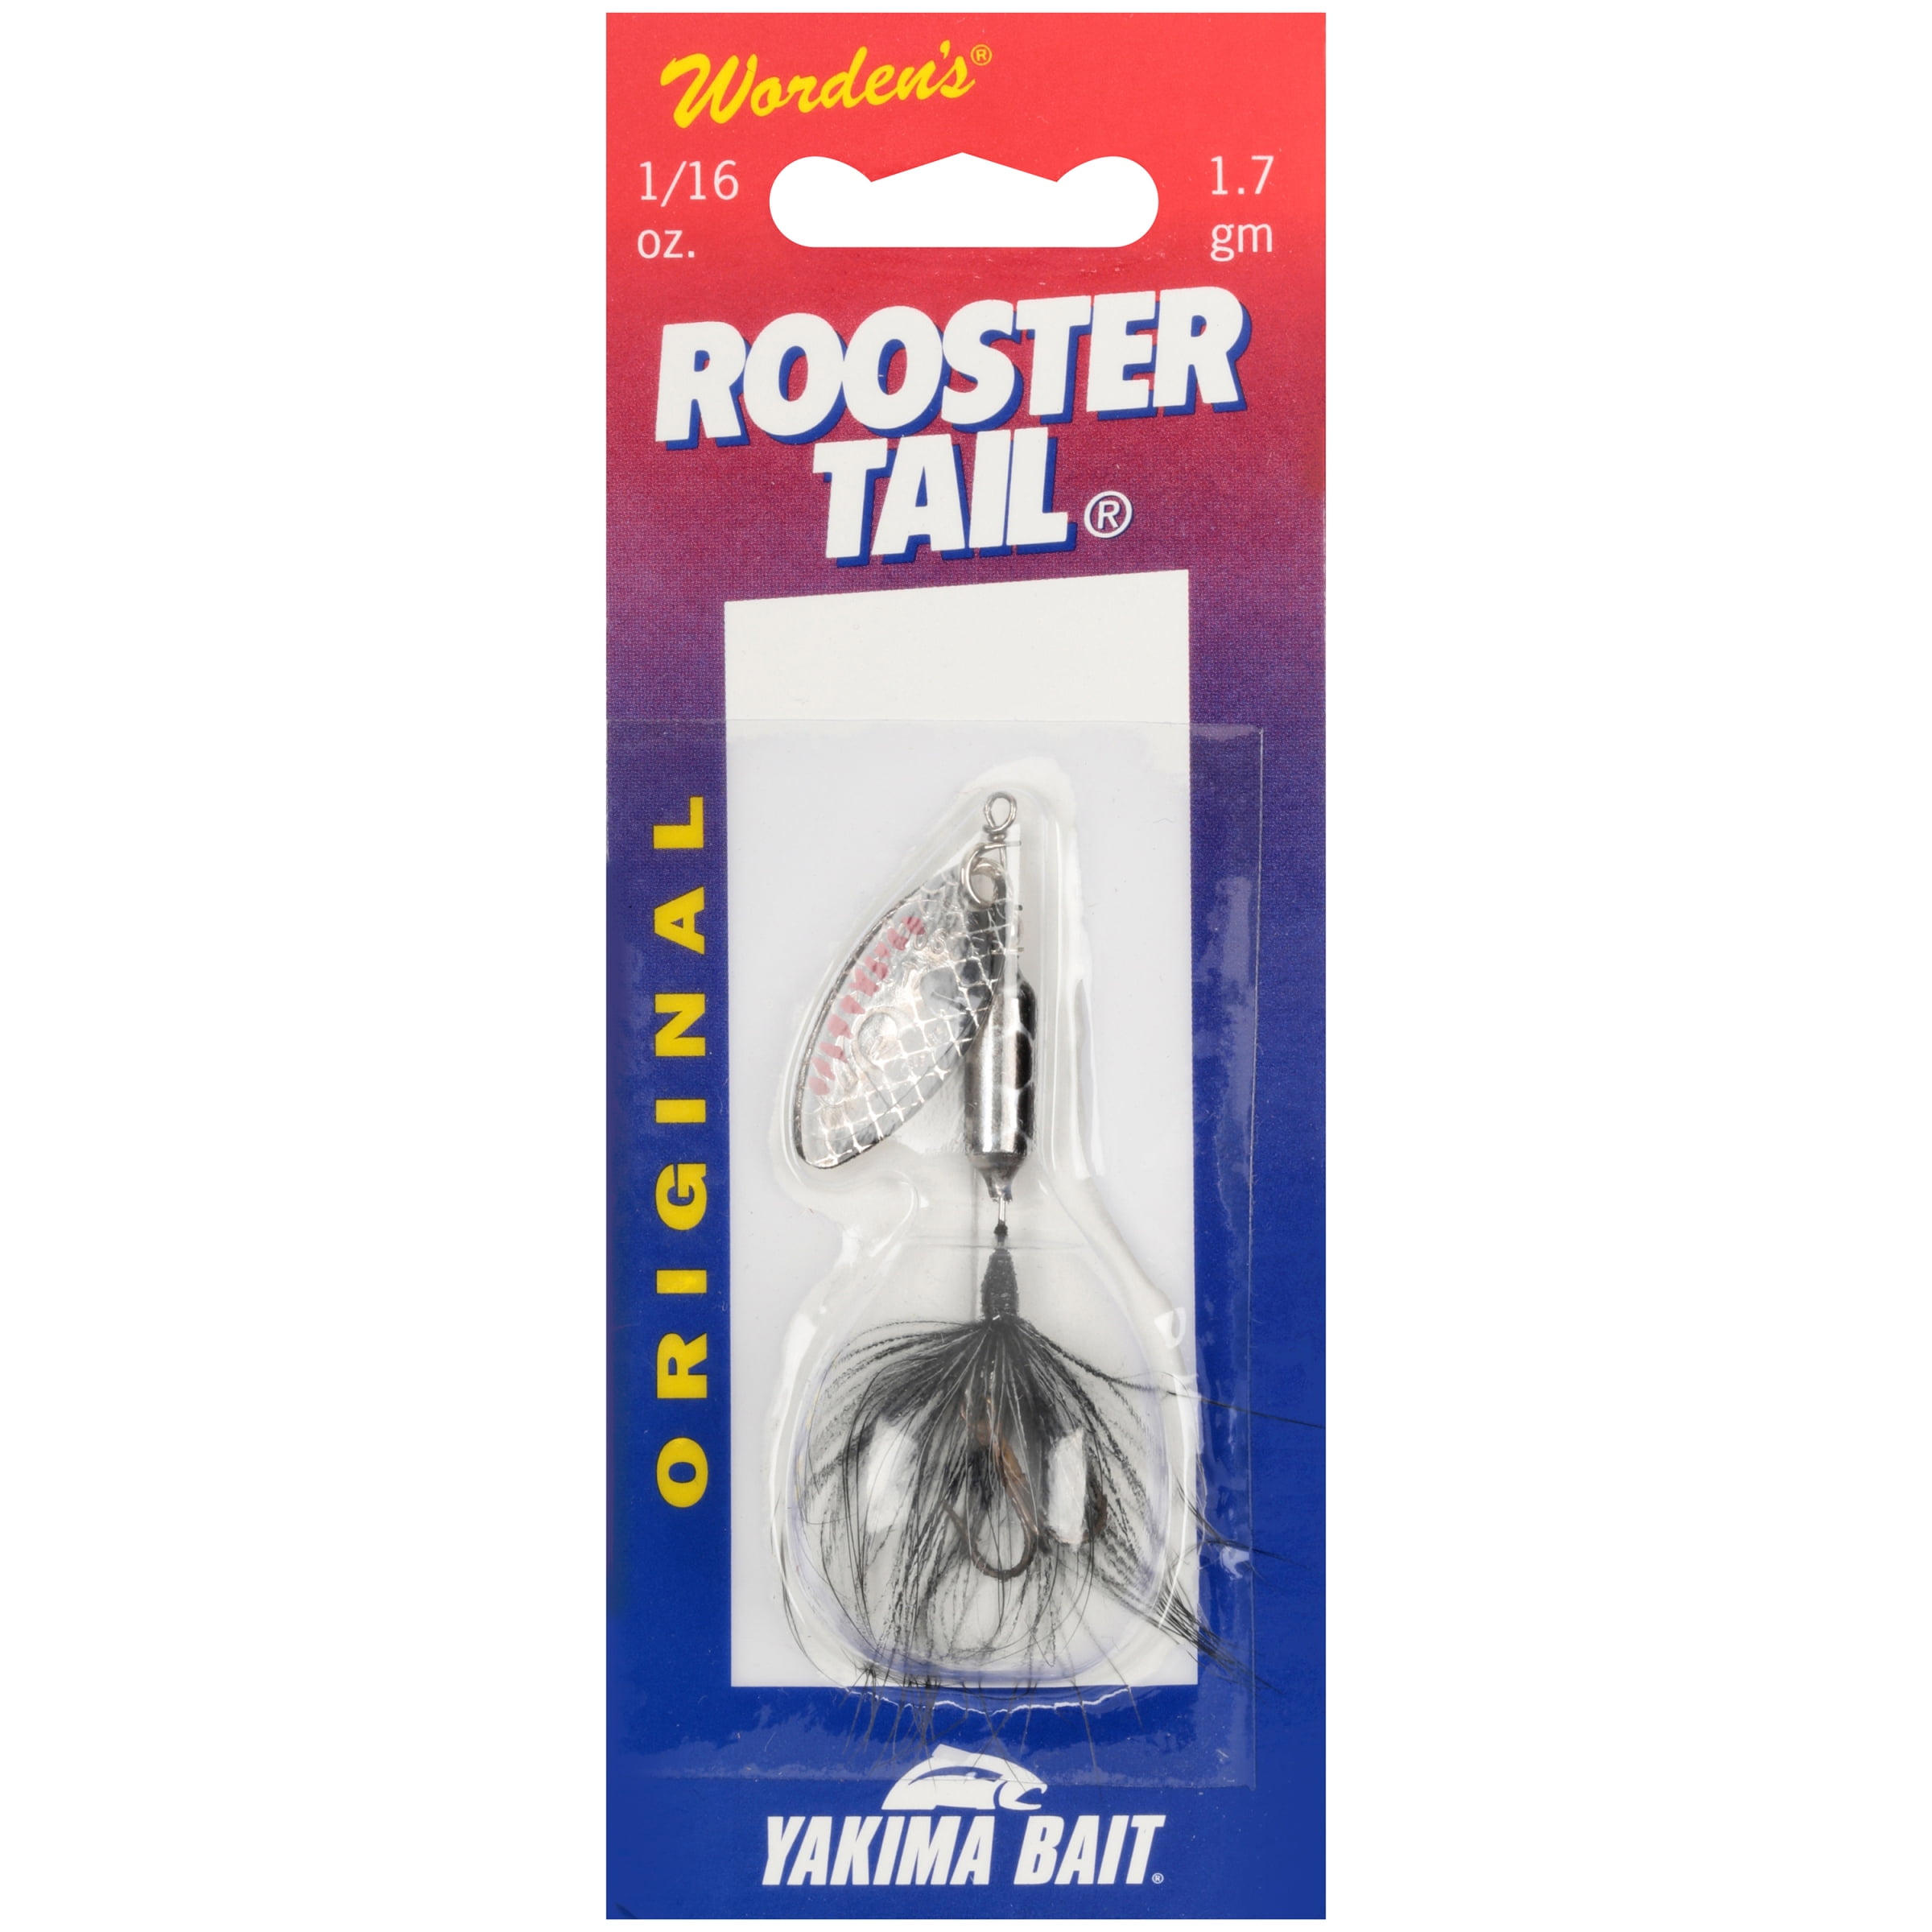 Worden's® Rooster Tail® Original, Met Silver Black Inline Spinnerbait  Fishing Lure, 1/16 oz. Carded Pack 